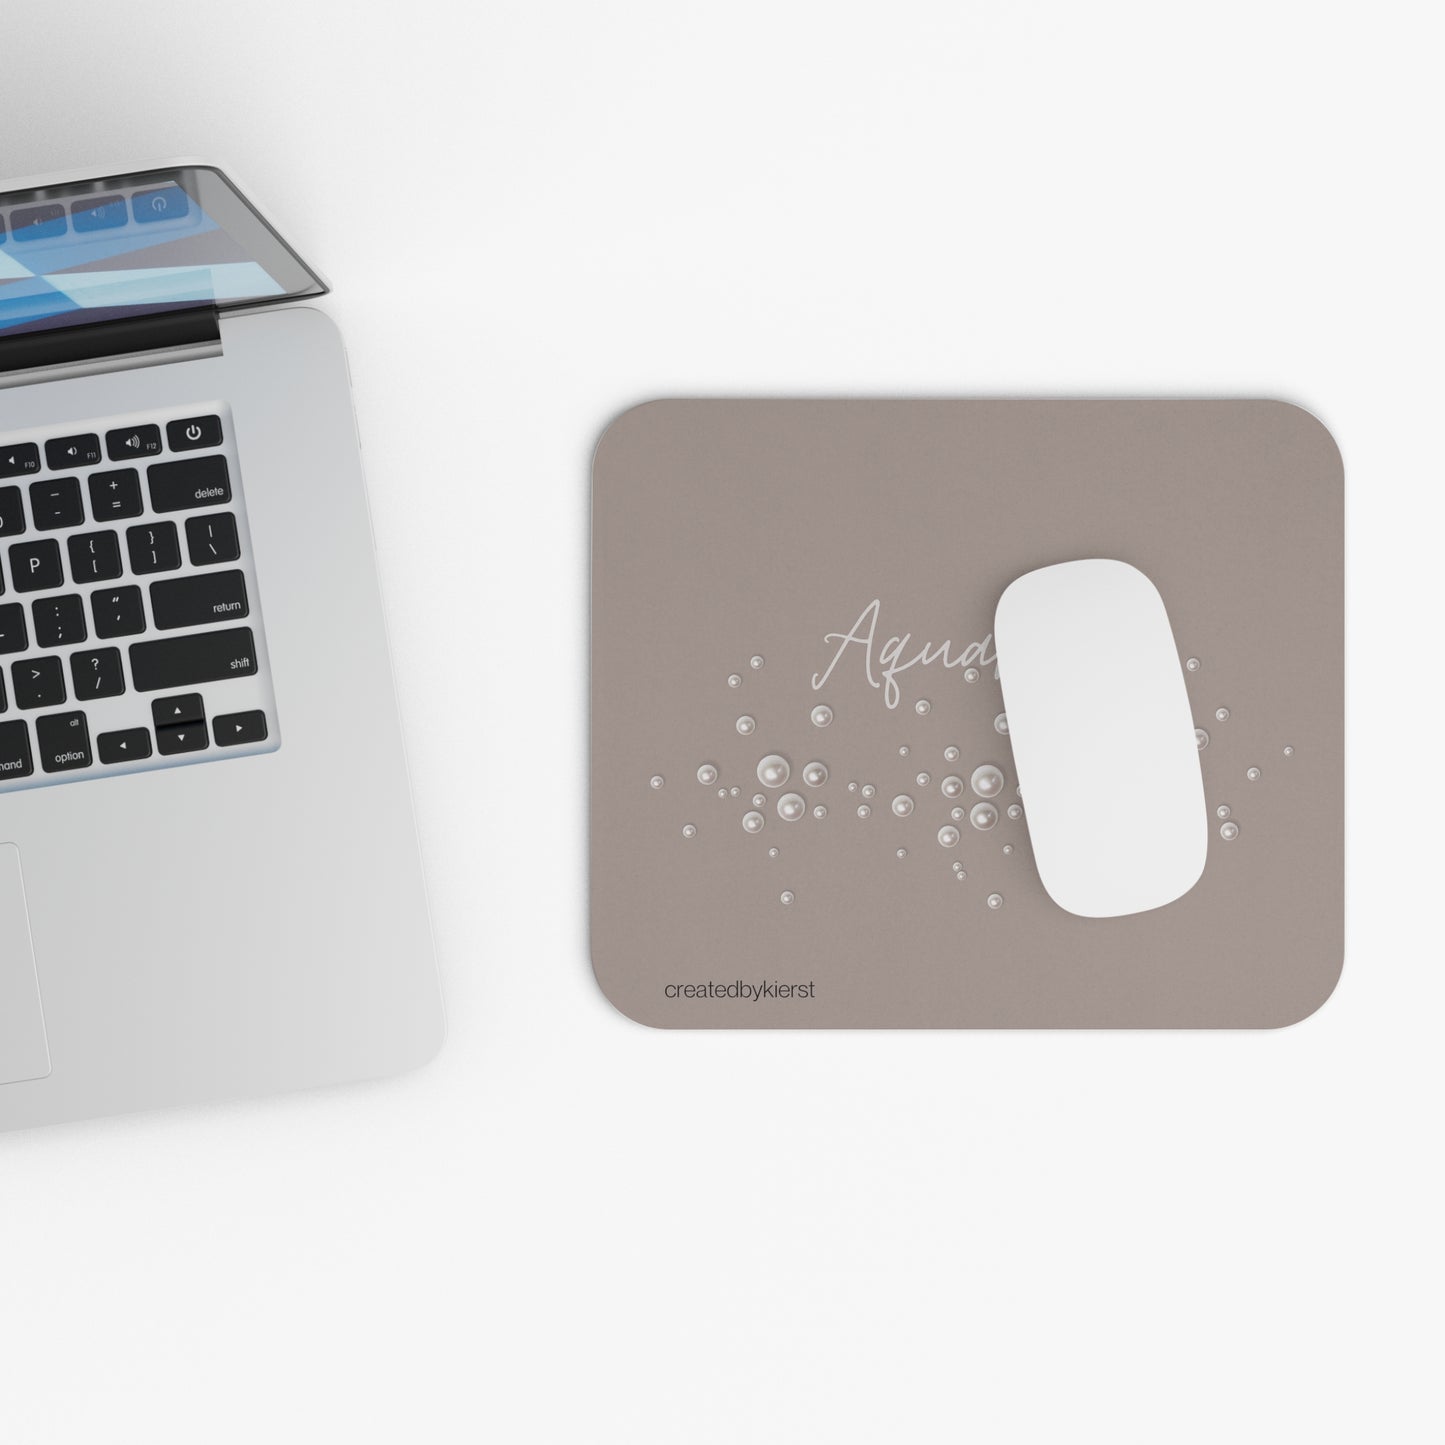 Aquarius and Pearls Mouse Pad (Rectangle)